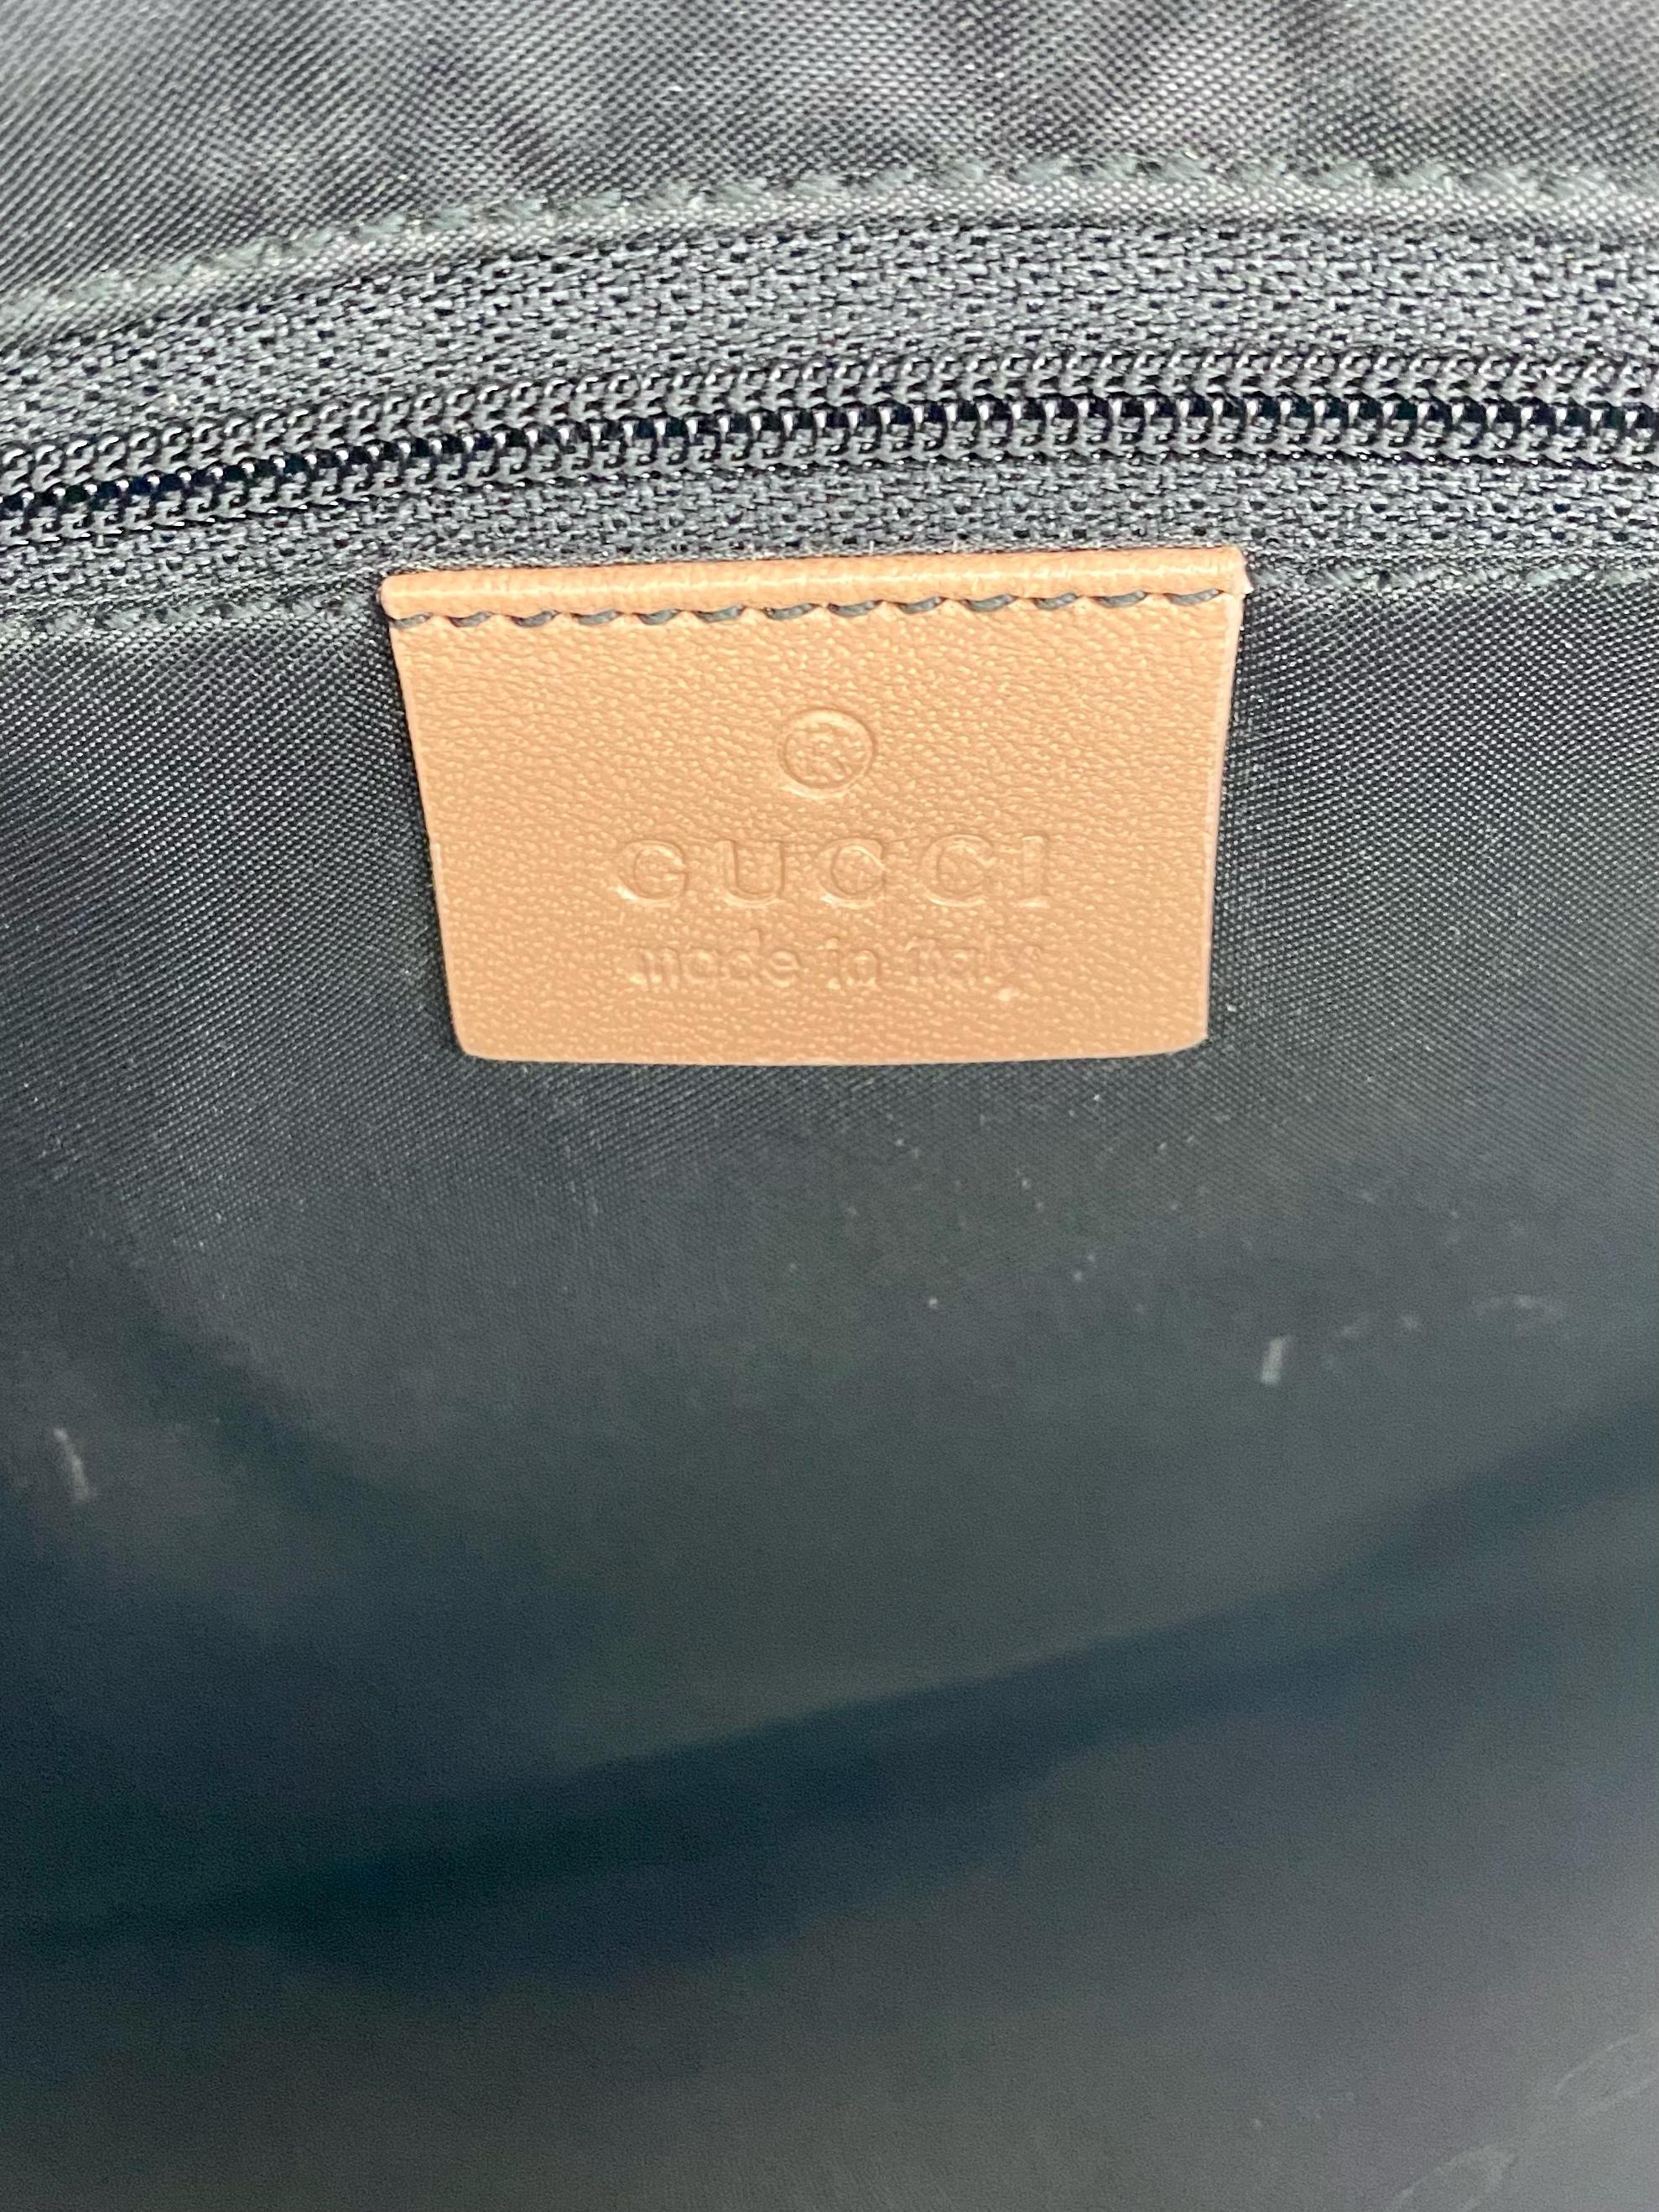 F/W 1999 Gucci by Tom Ford Ruched Silk Jackie Bag Ad Campaign In Good Condition For Sale In West Hollywood, CA